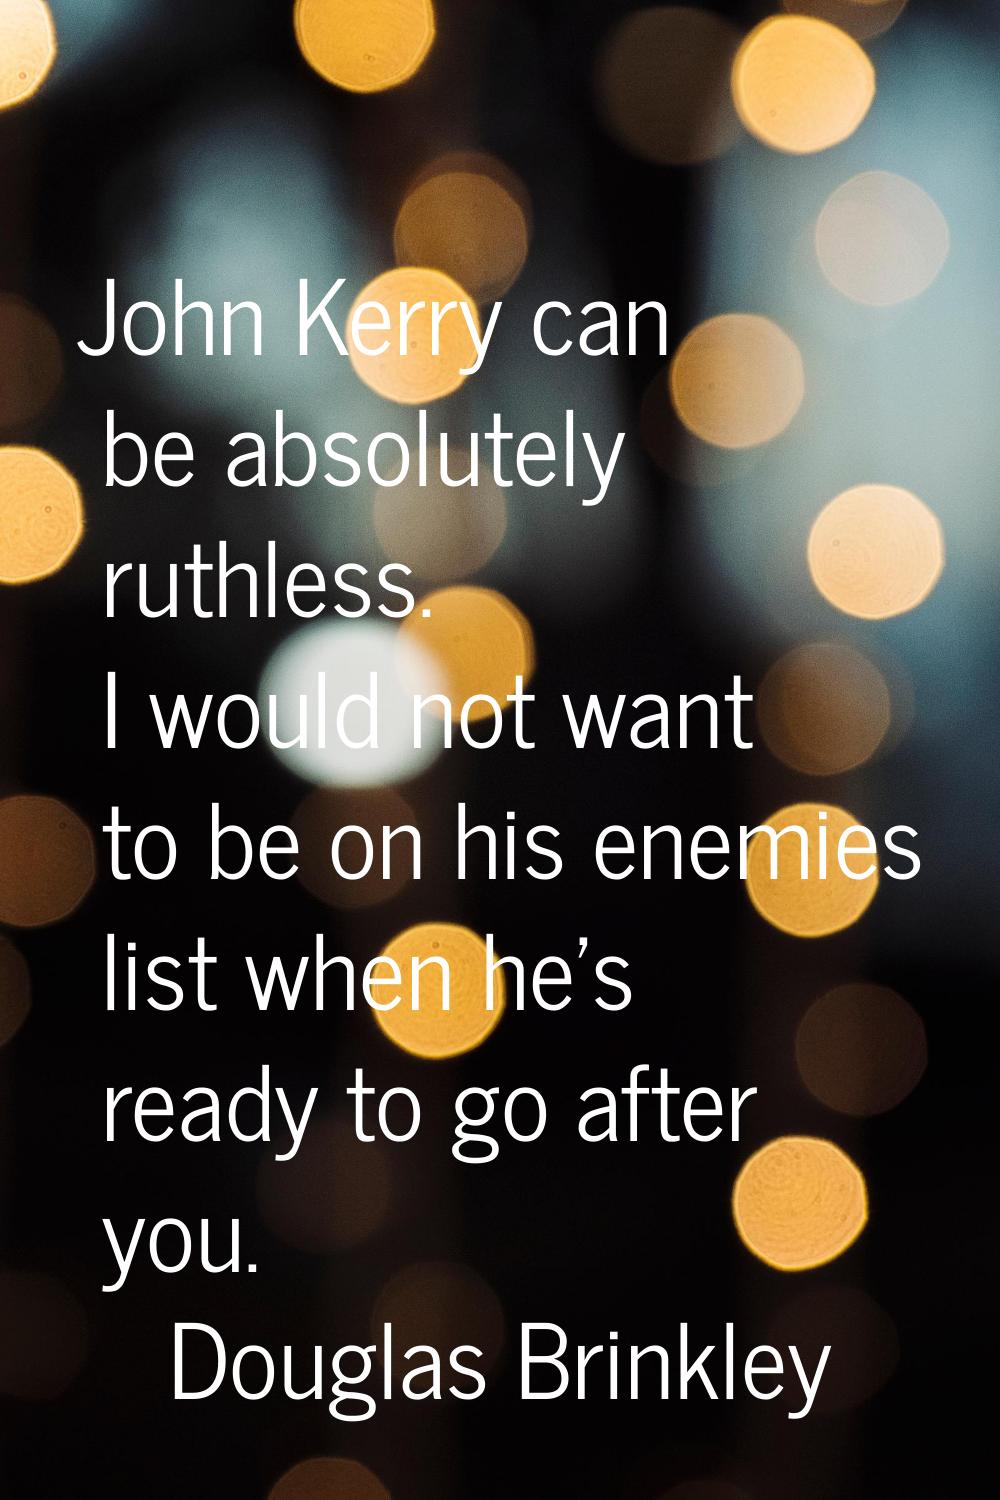 John Kerry can be absolutely ruthless. I would not want to be on his enemies list when he's ready t